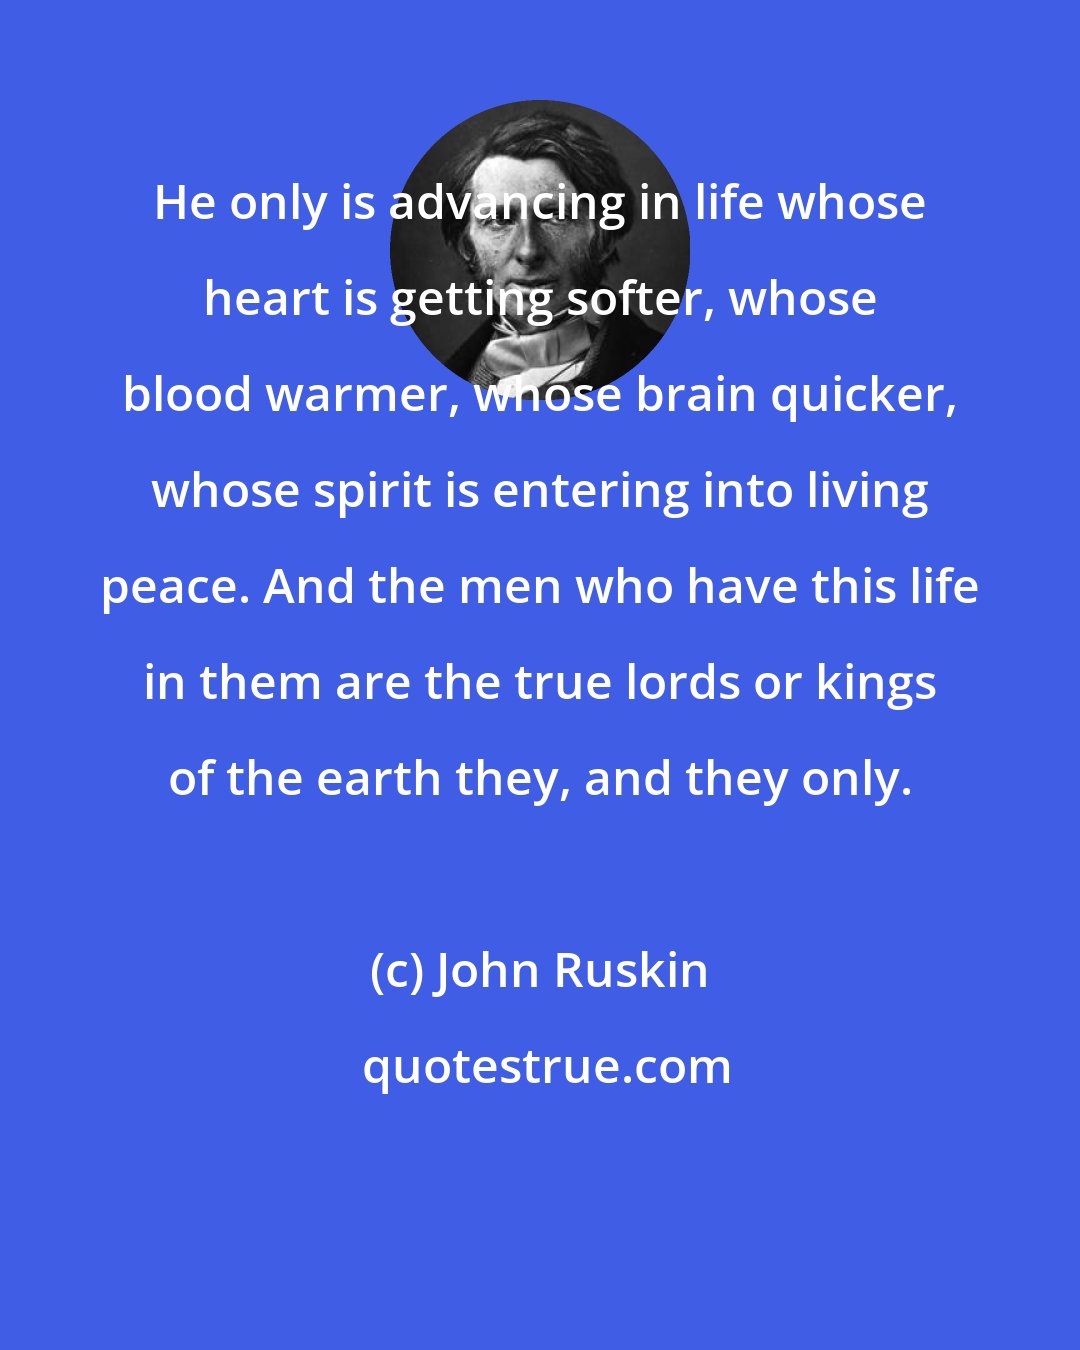 John Ruskin: He only is advancing in life whose heart is getting softer, whose blood warmer, whose brain quicker, whose spirit is entering into living peace. And the men who have this life in them are the true lords or kings of the earth they, and they only.